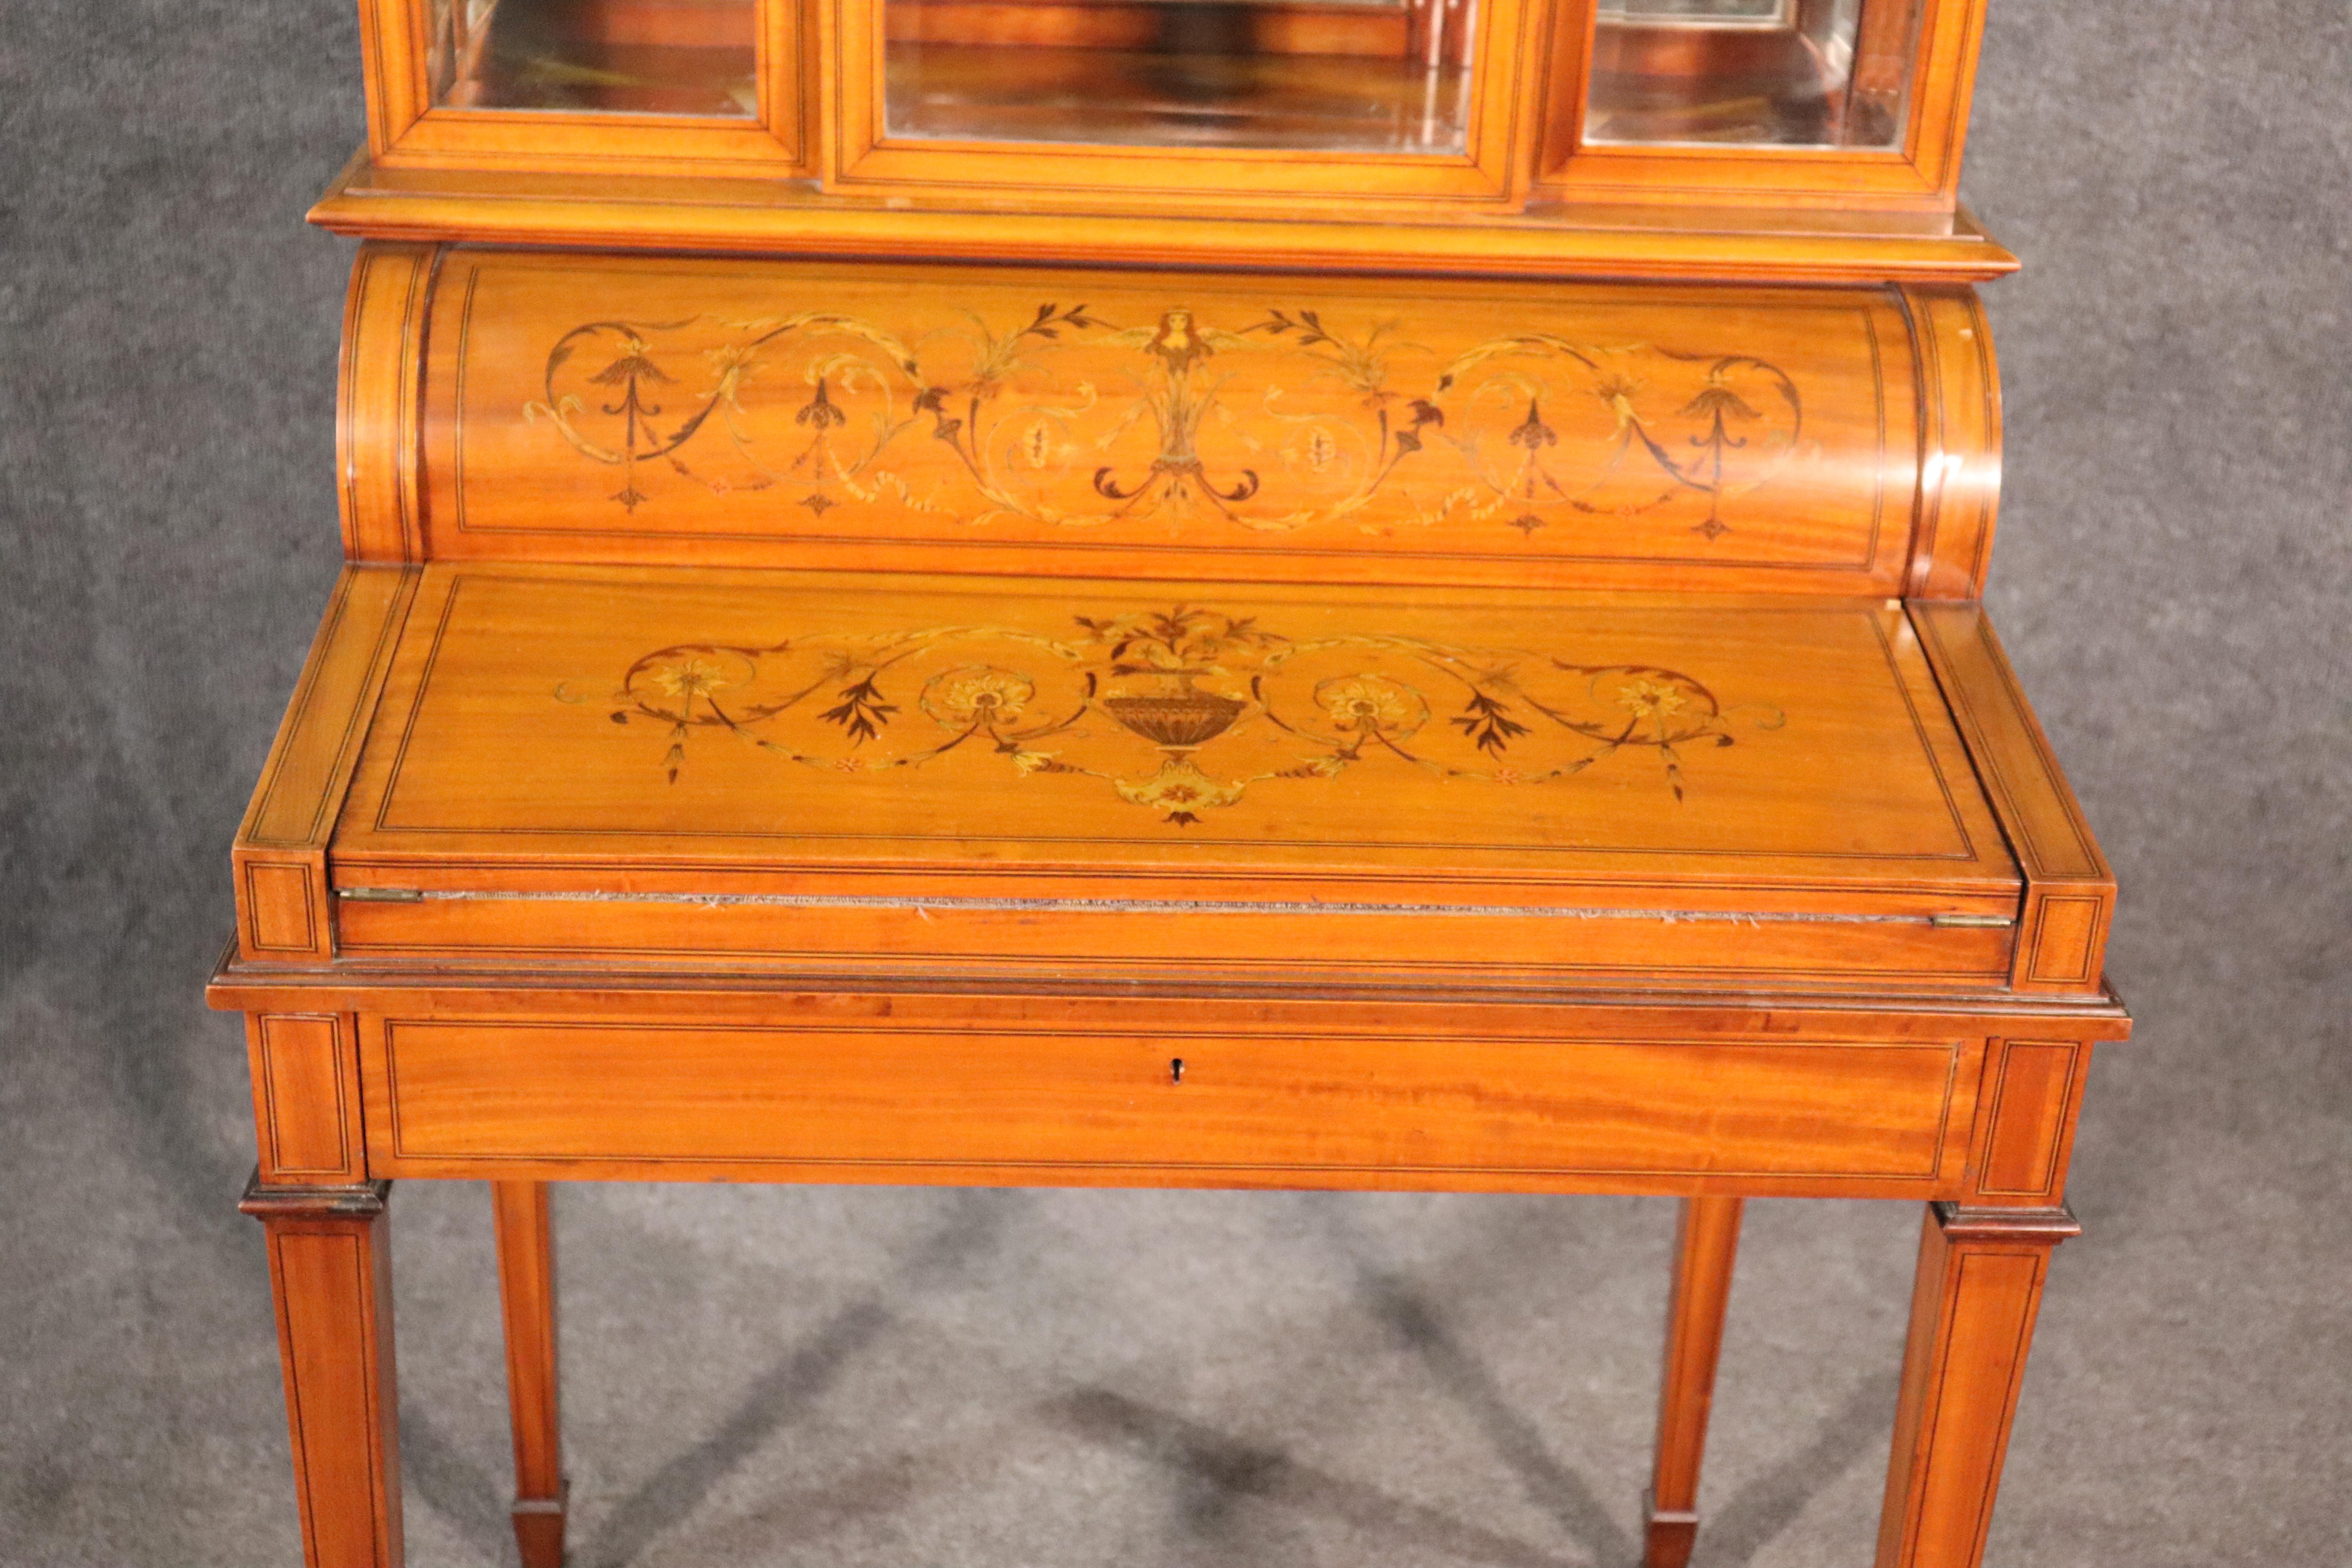 English Satinwood Adams Inlaid Secretary Desk Vitrine Top with Inkwells In Good Condition For Sale In Swedesboro, NJ